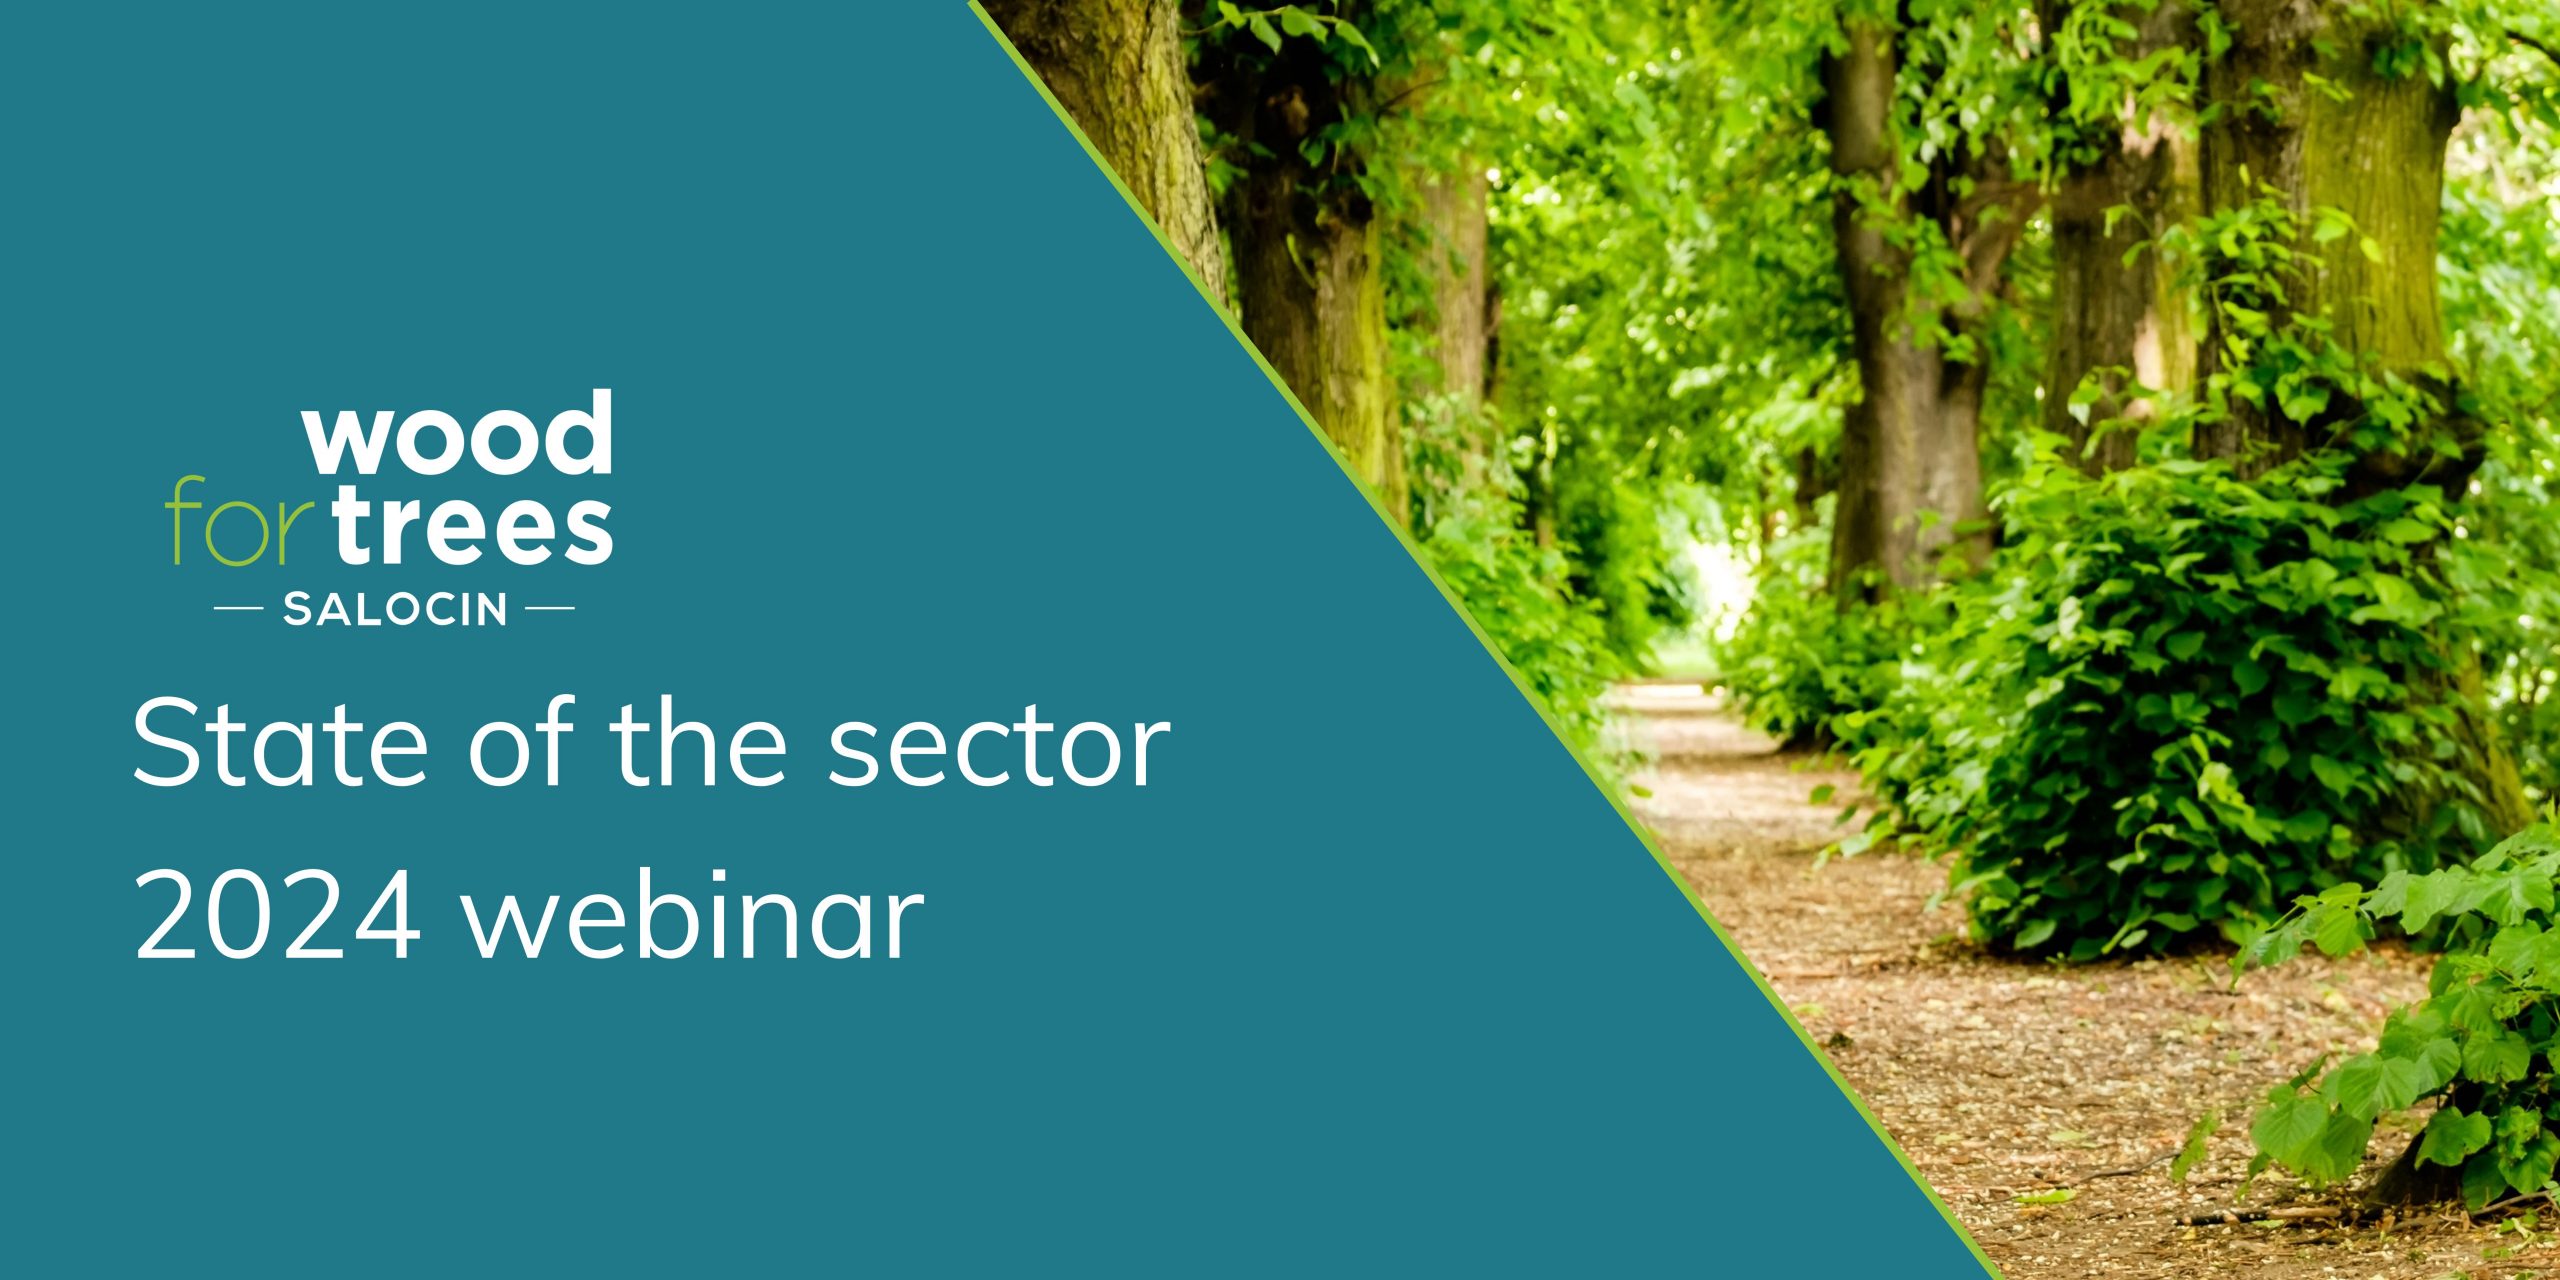 State of the sector 2024 webinar